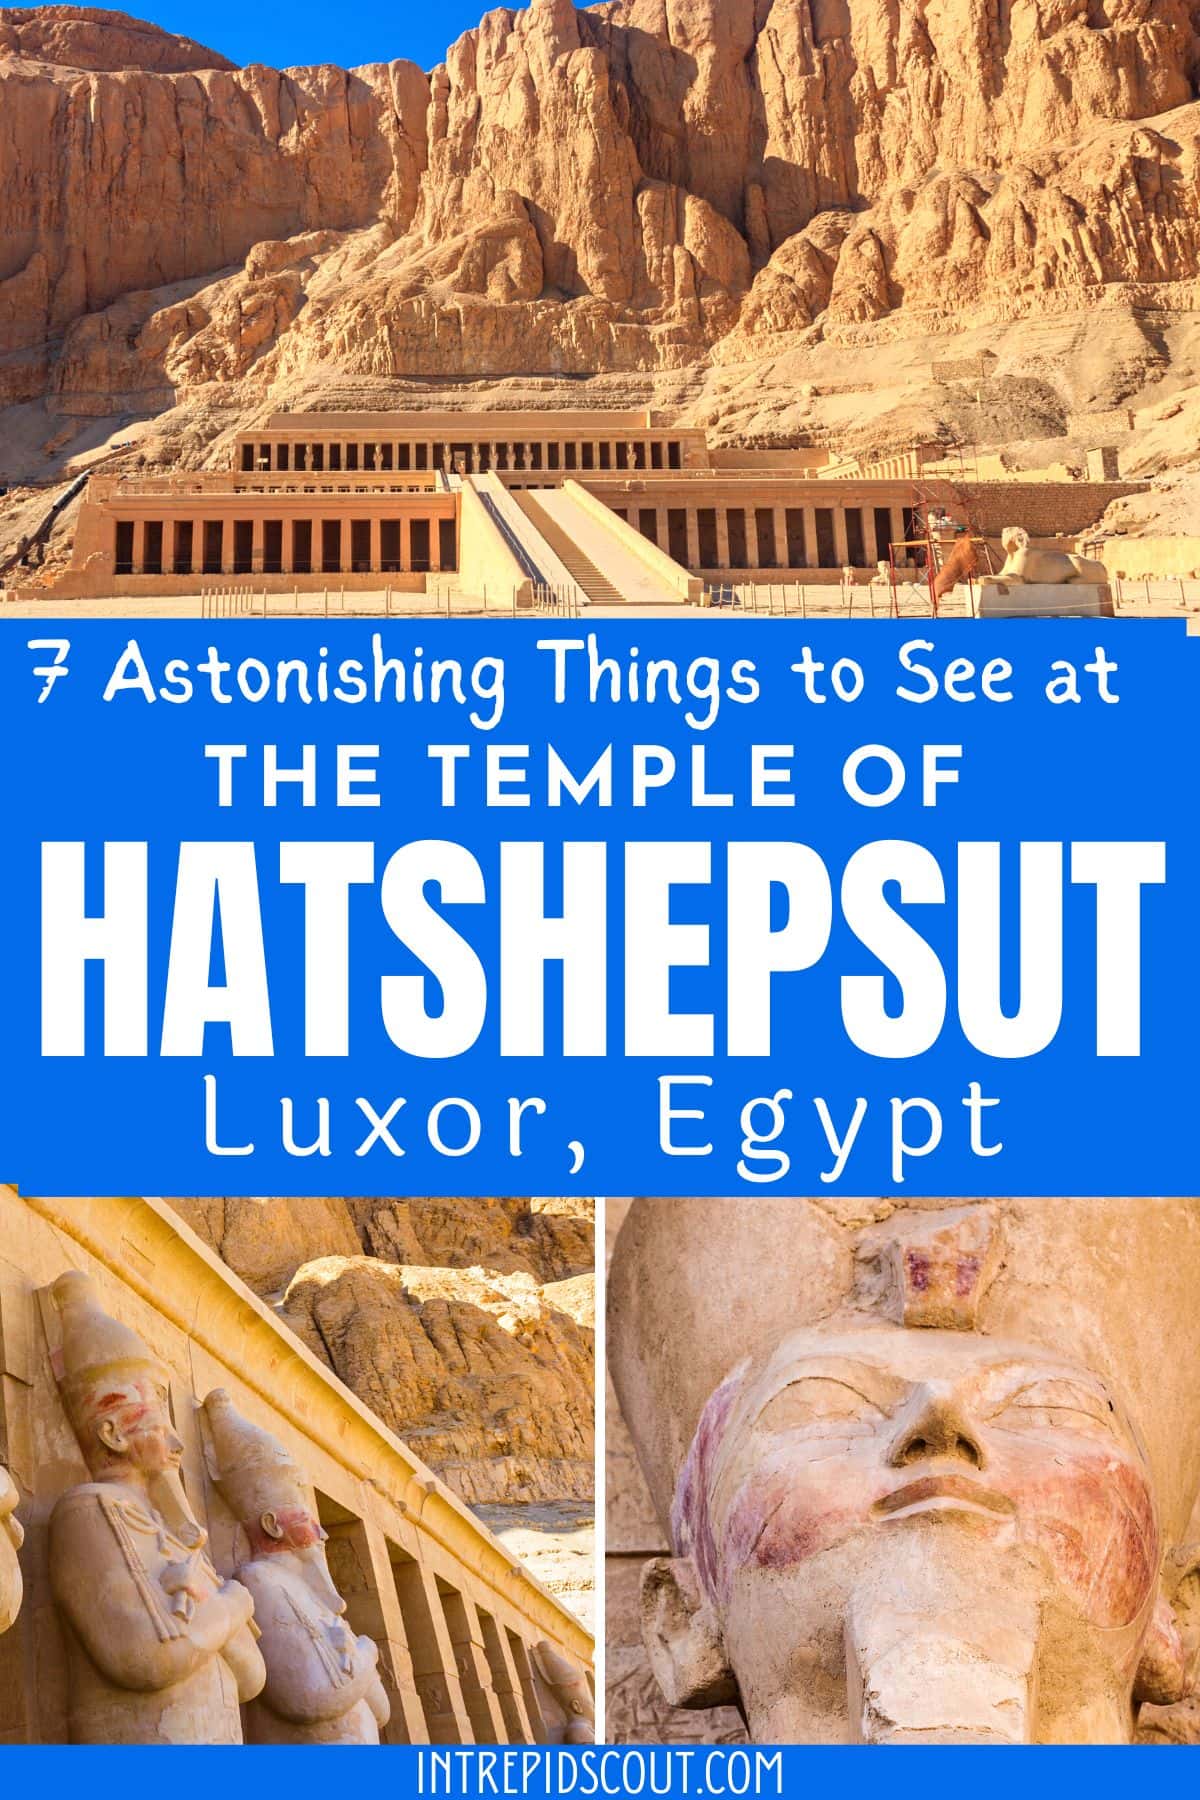 Things to See at. the Temple of Hatshepsut